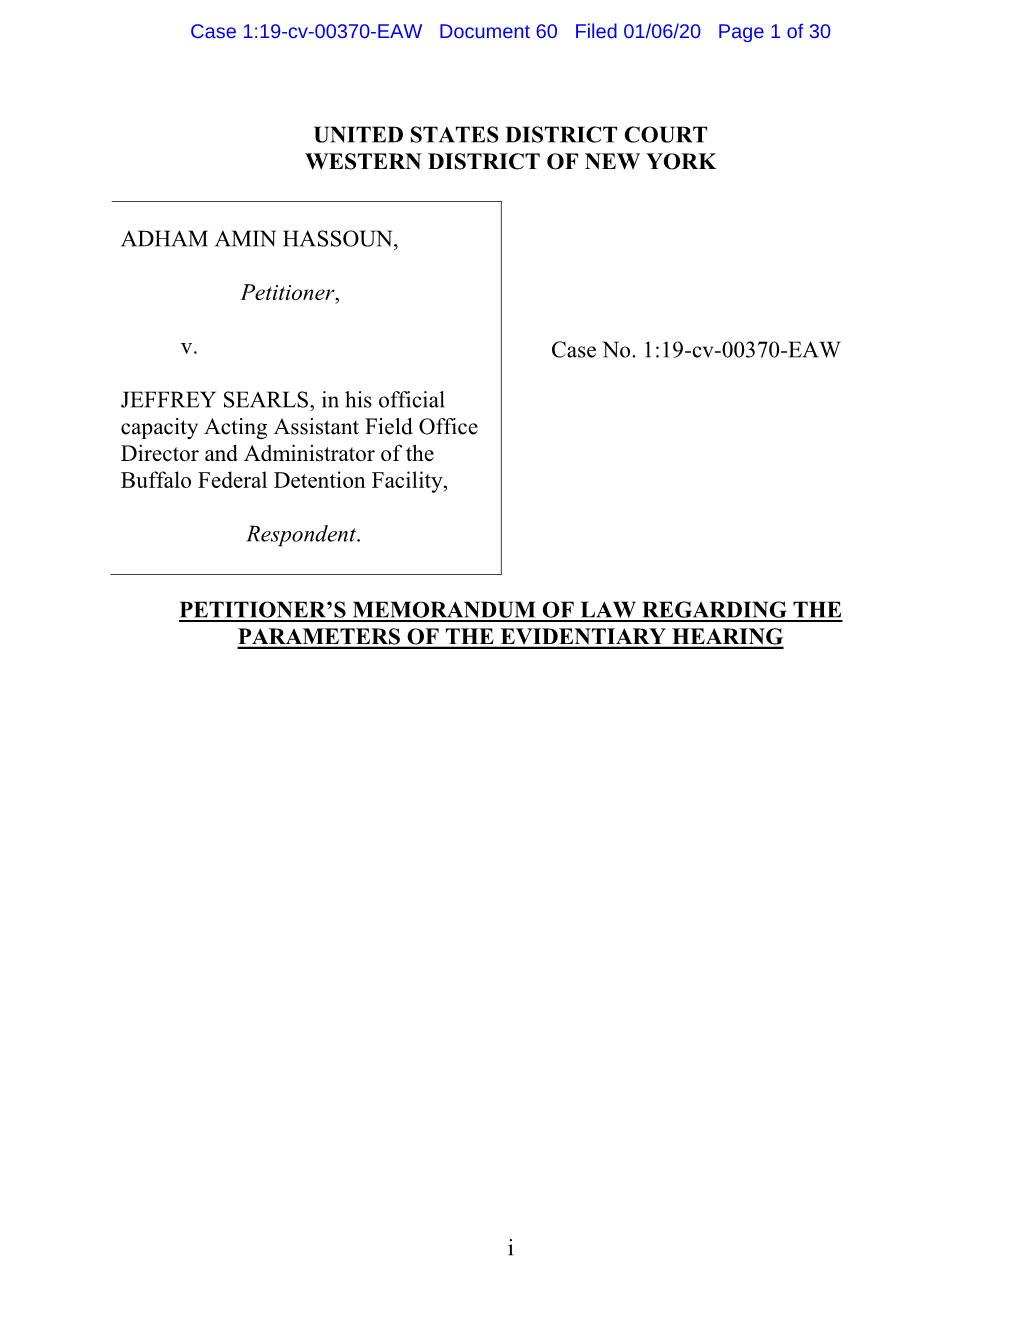 Download Legal Document